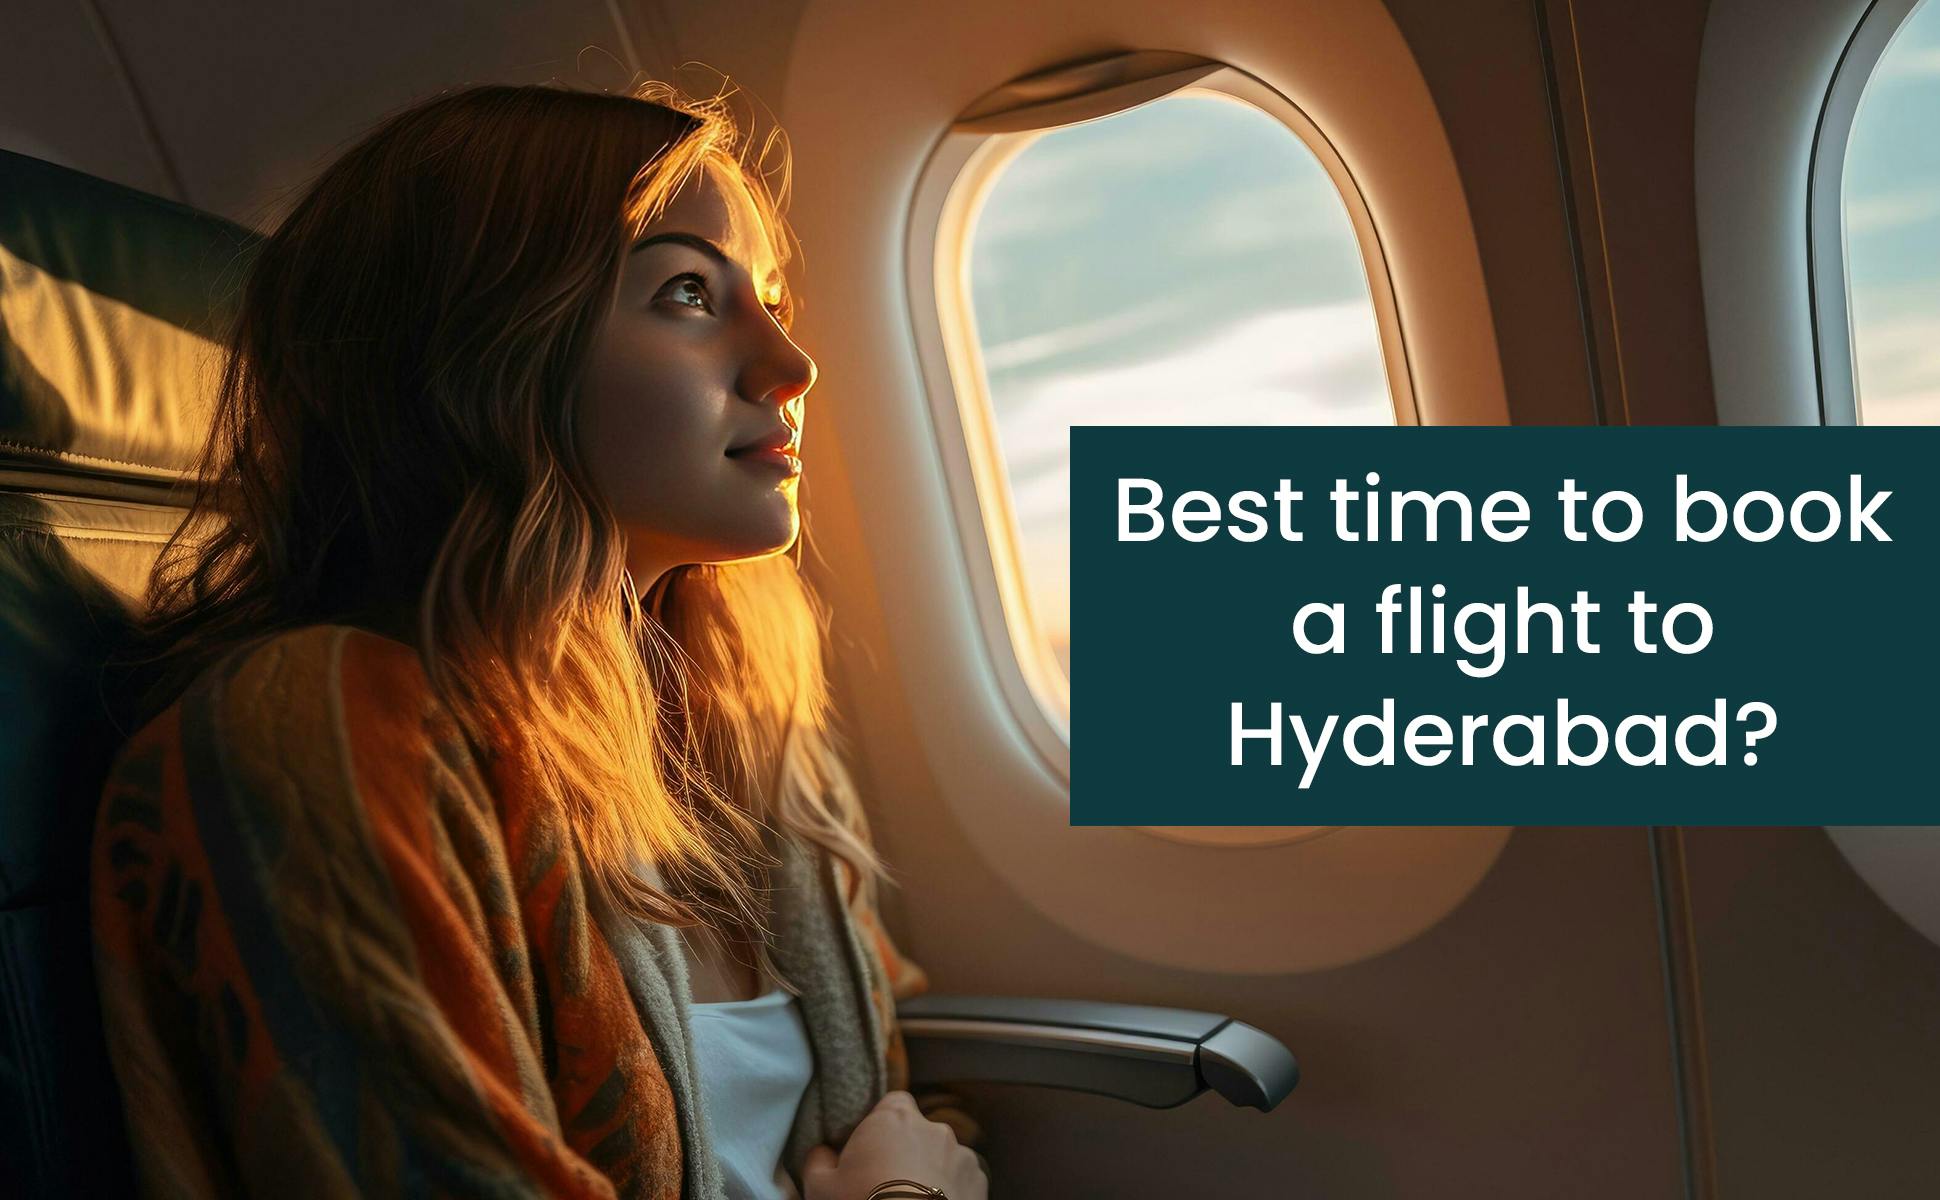 What is the best time to book a flight to Hyderabad?